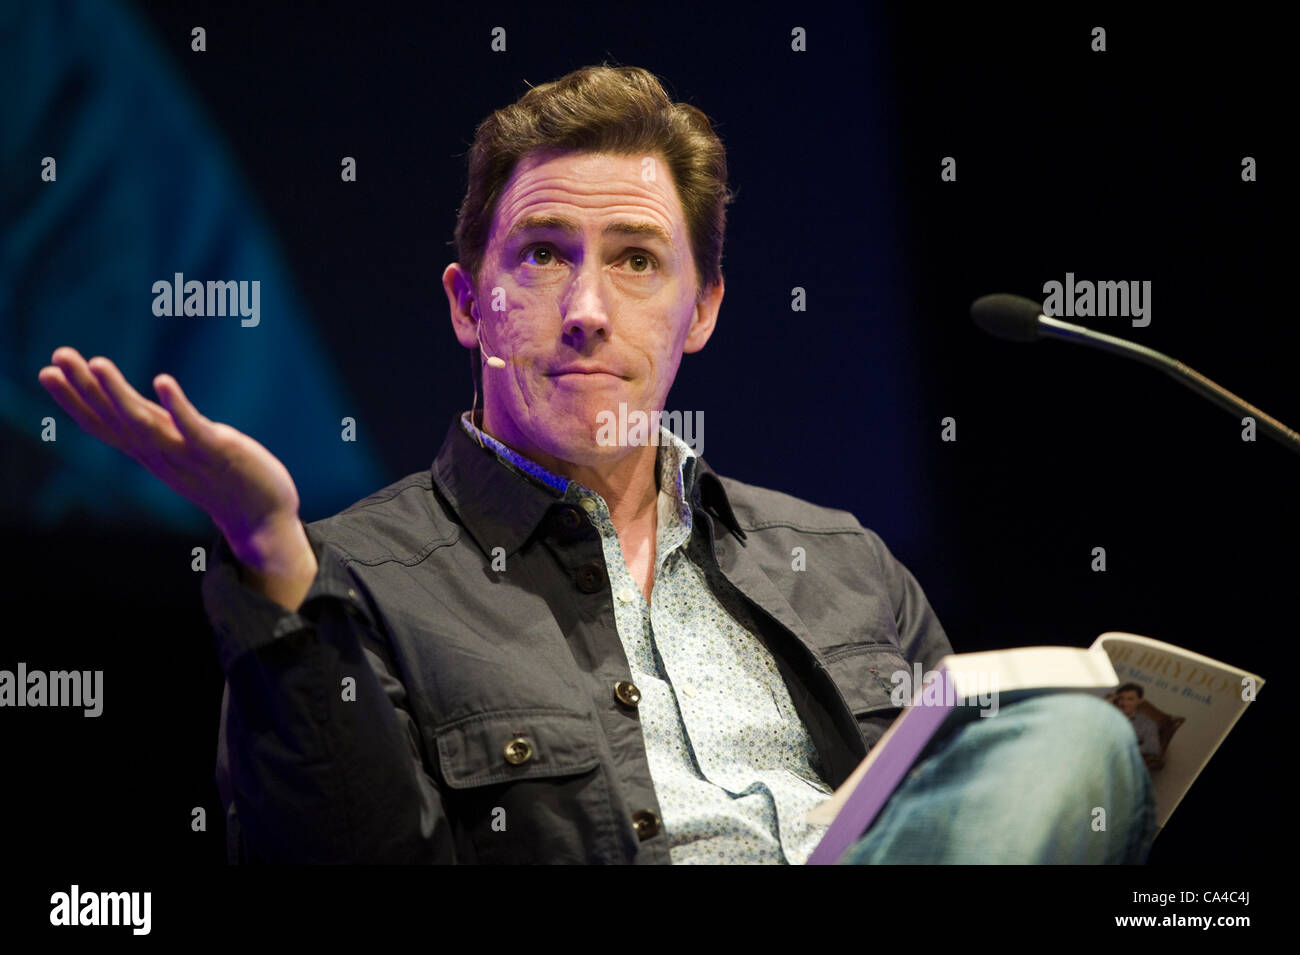 Rob Brydon, Welsh actor comedian and author, speaking at The Telegraph Hay Festival 2012, Hay-on-Wye, Powys, Wales, UK. Stock Photo